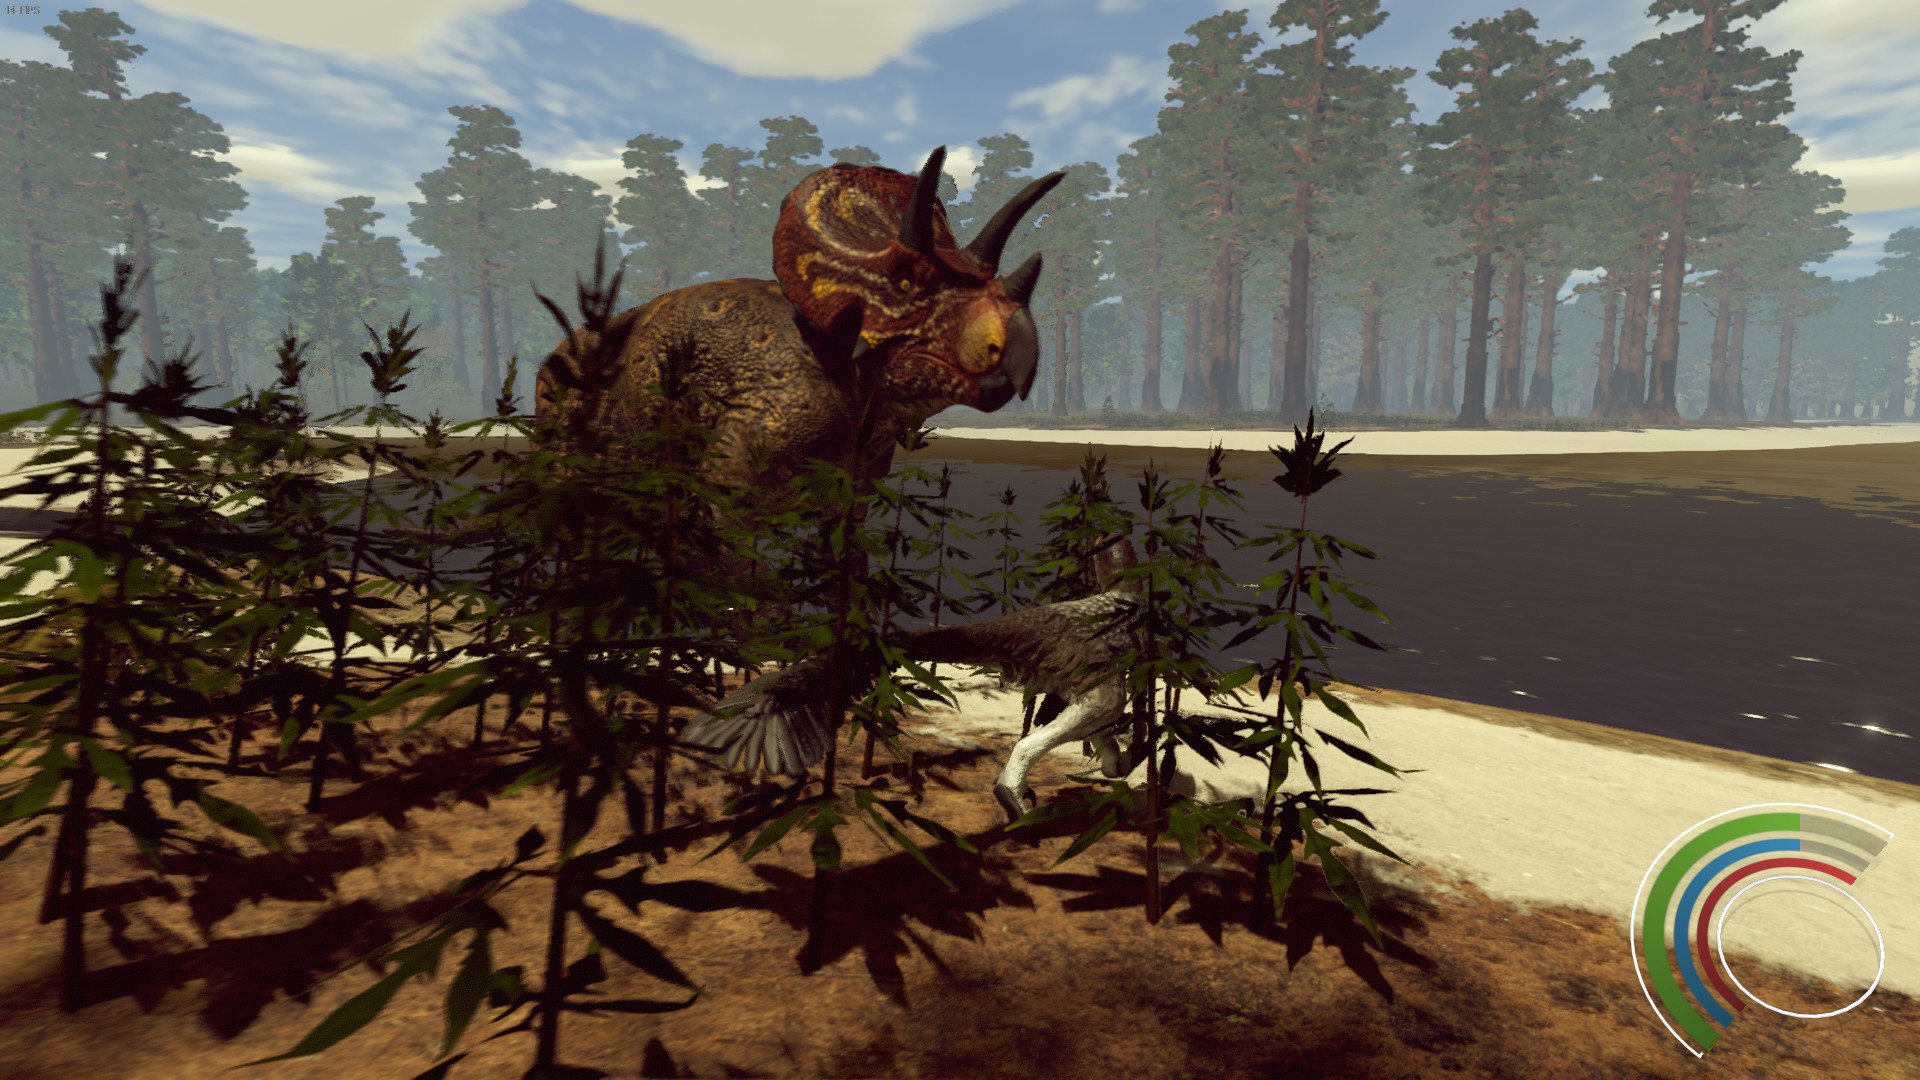 I Ate My Parents In A ‘Scientifically Accurate’ Dinosaur Survival Game